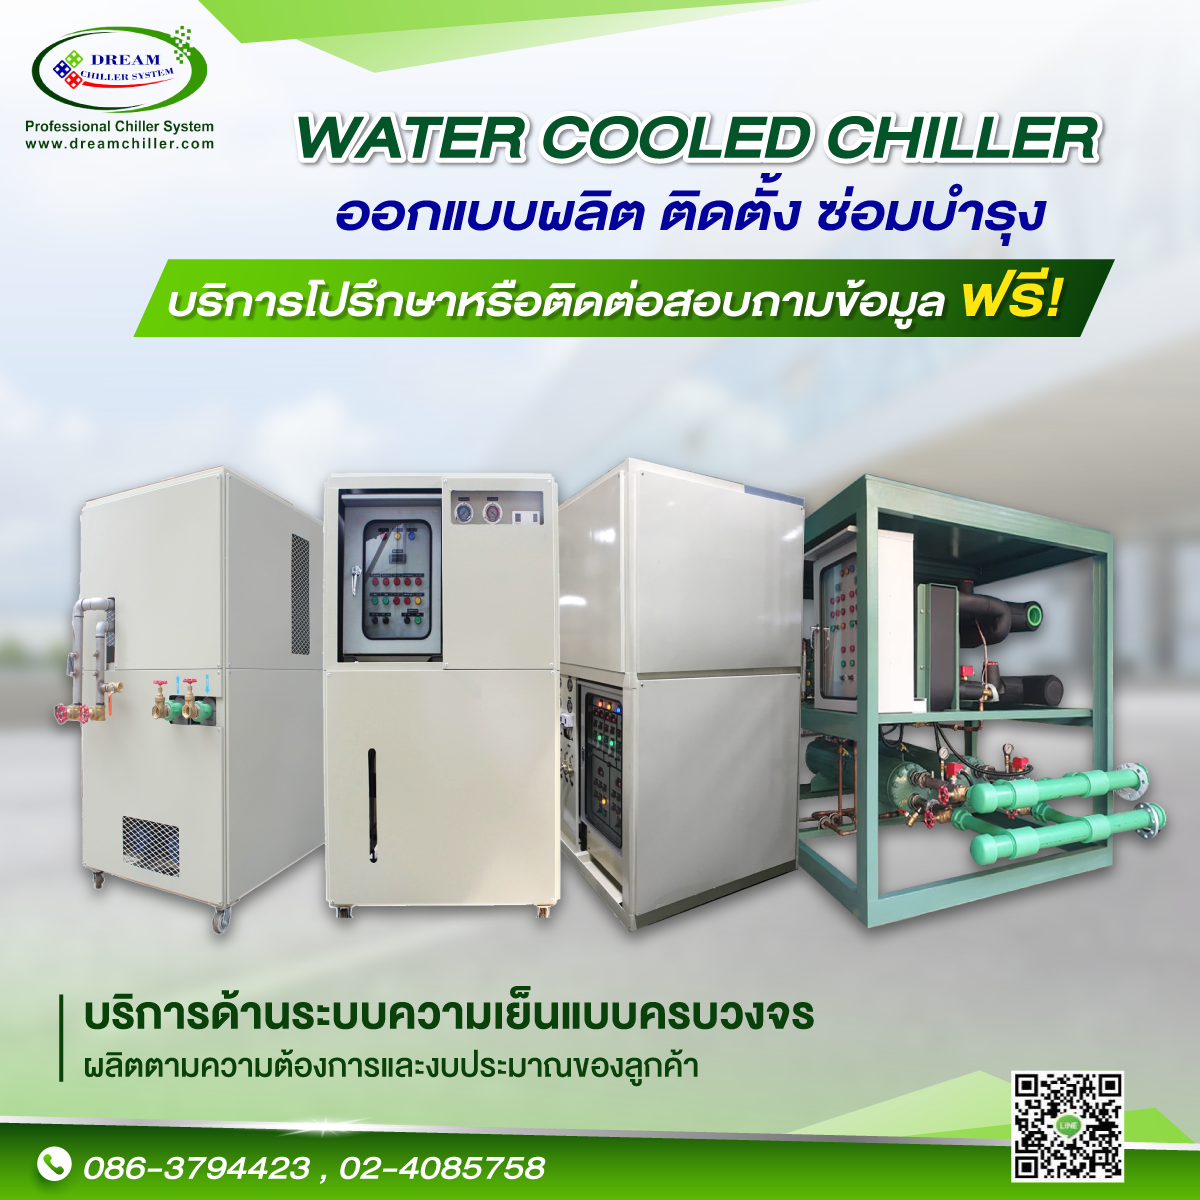 WATER  COOLED  CHILLER   4 - 16  Tons.